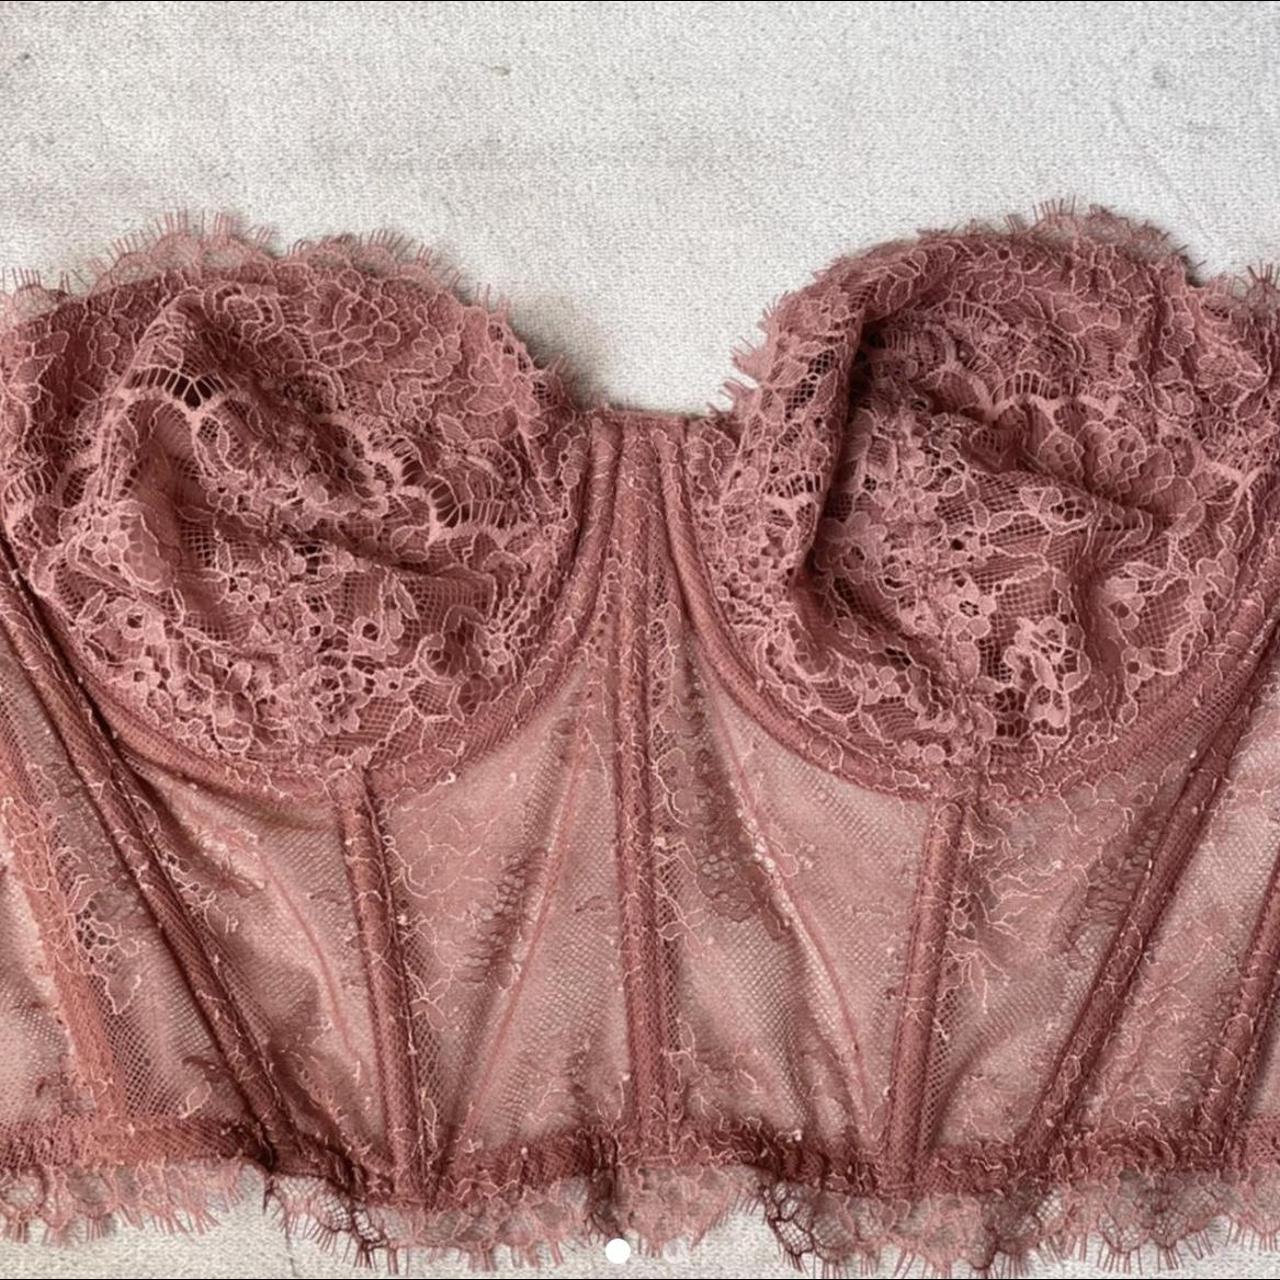 Victoria secret corset top worn once, Comes with